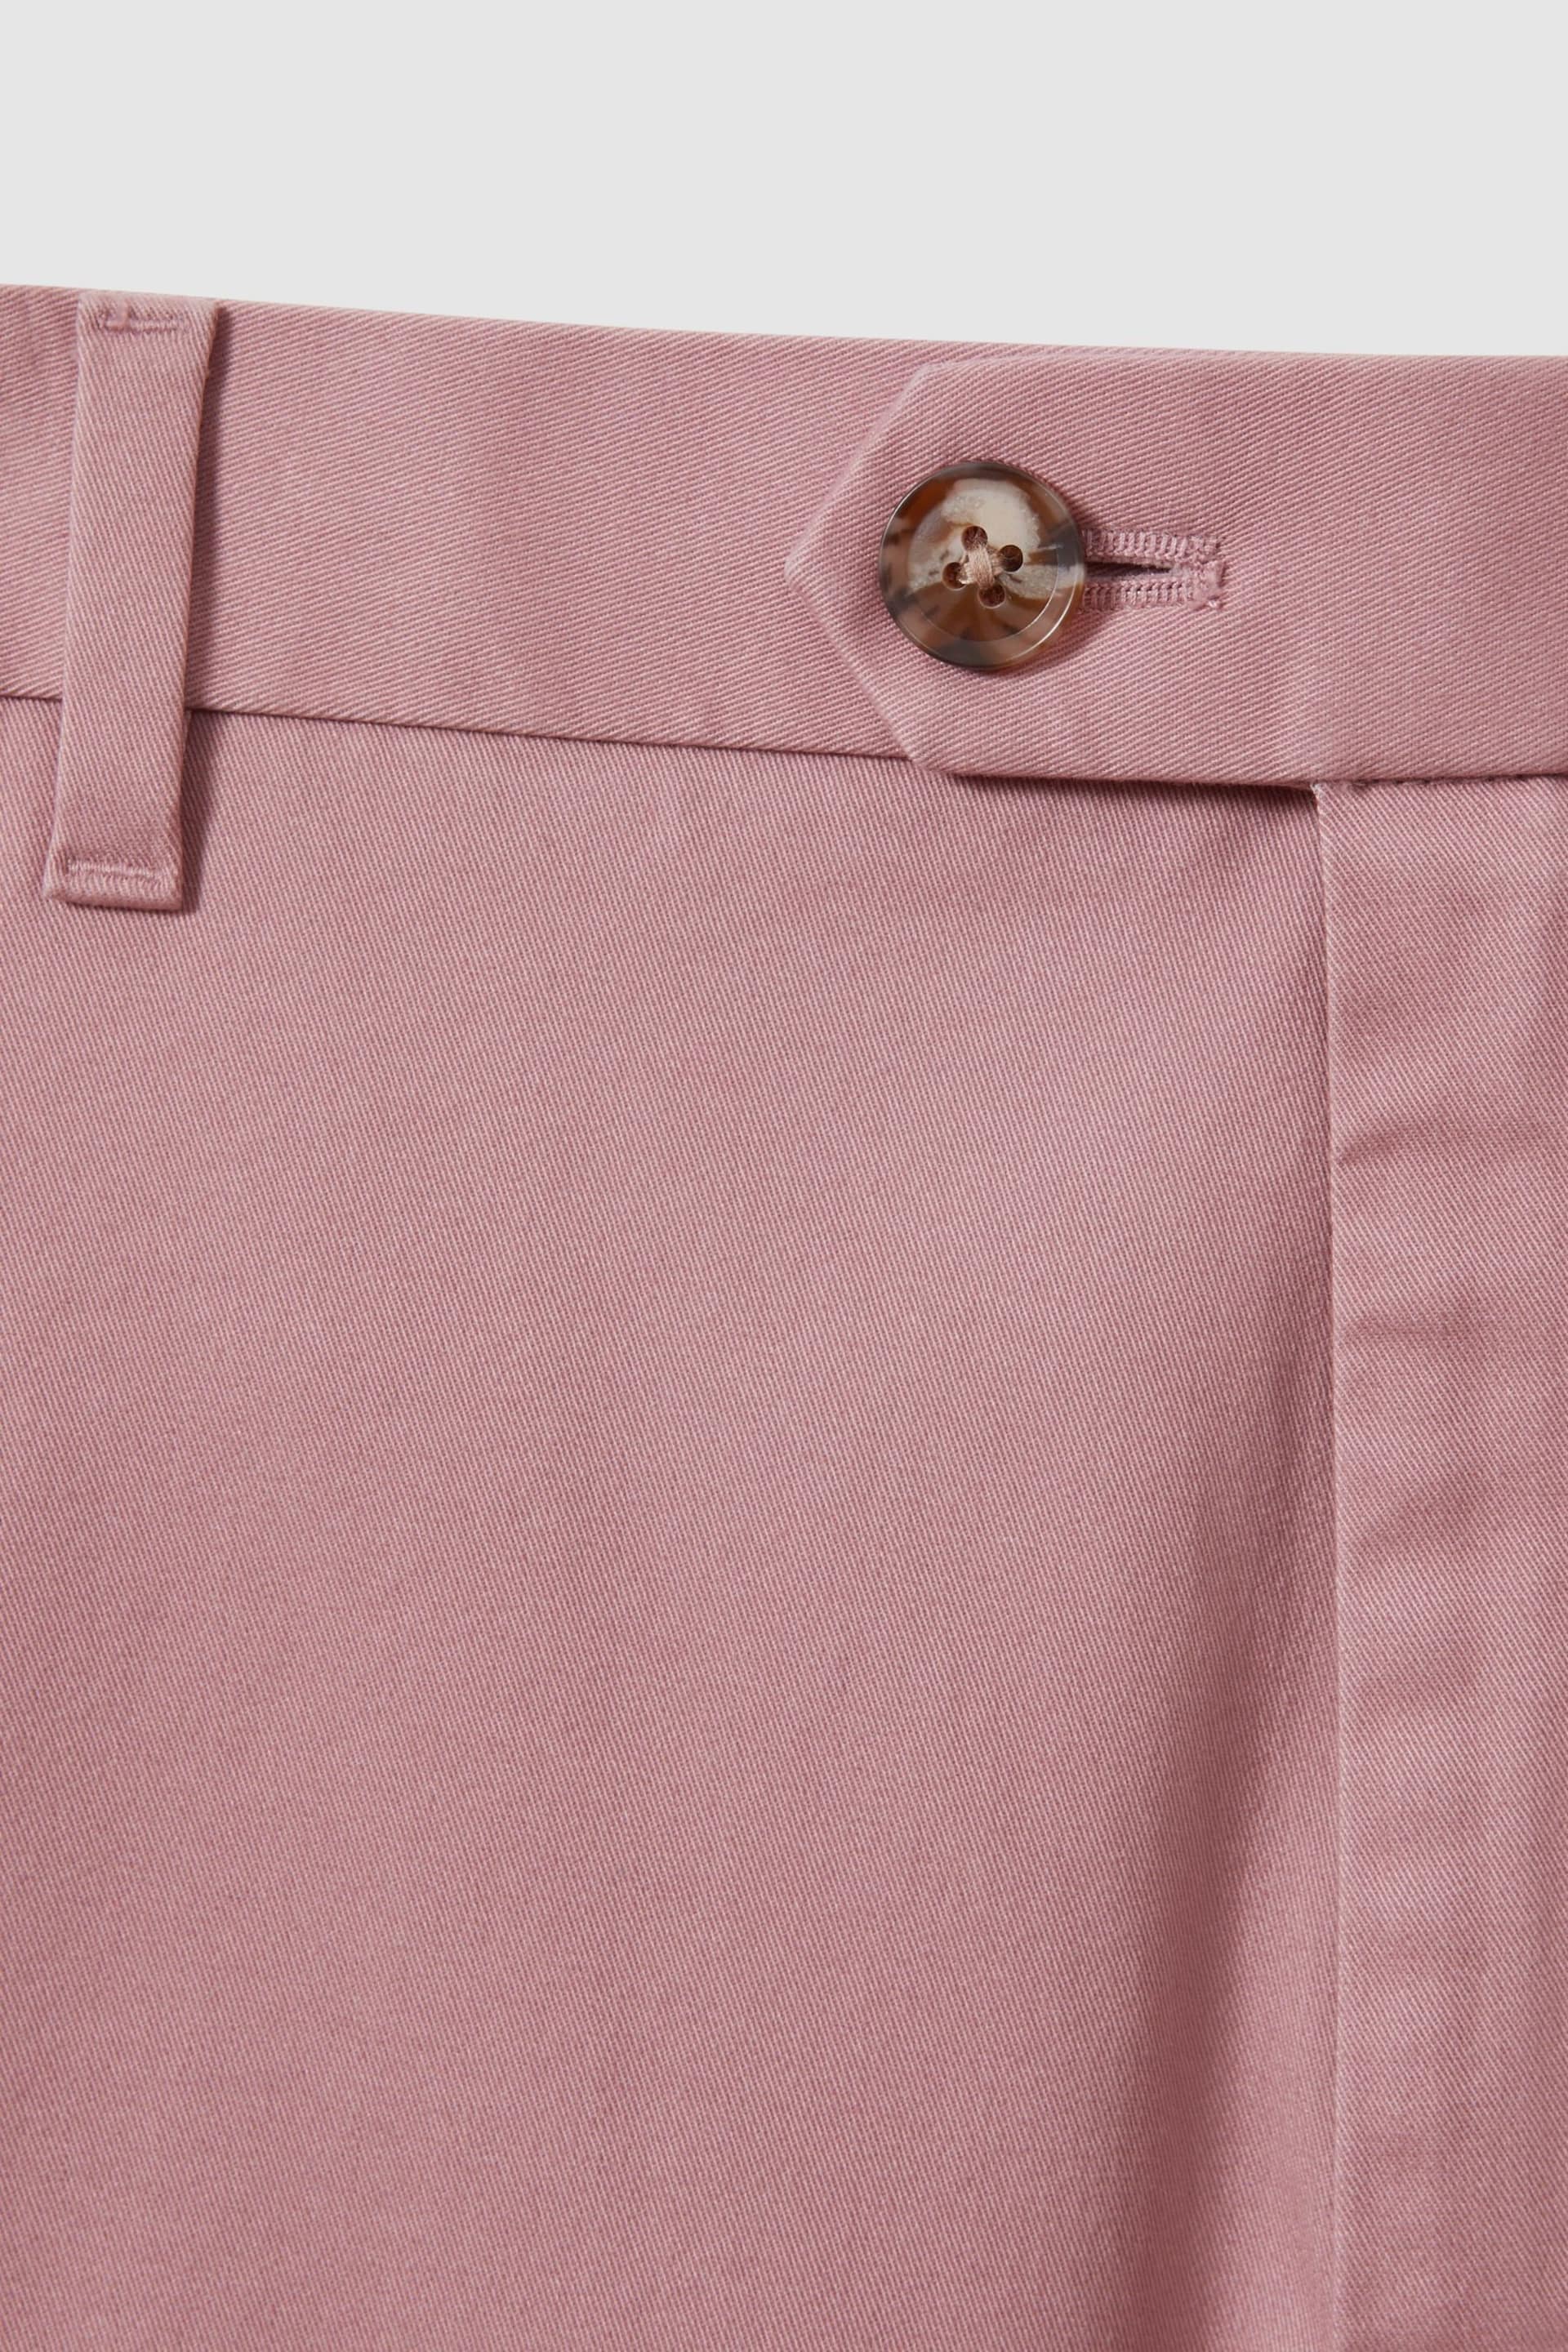 Reiss Dusty Pink Wicket Modern Fit Cotton Blend Chino Shorts - Image 7 of 7